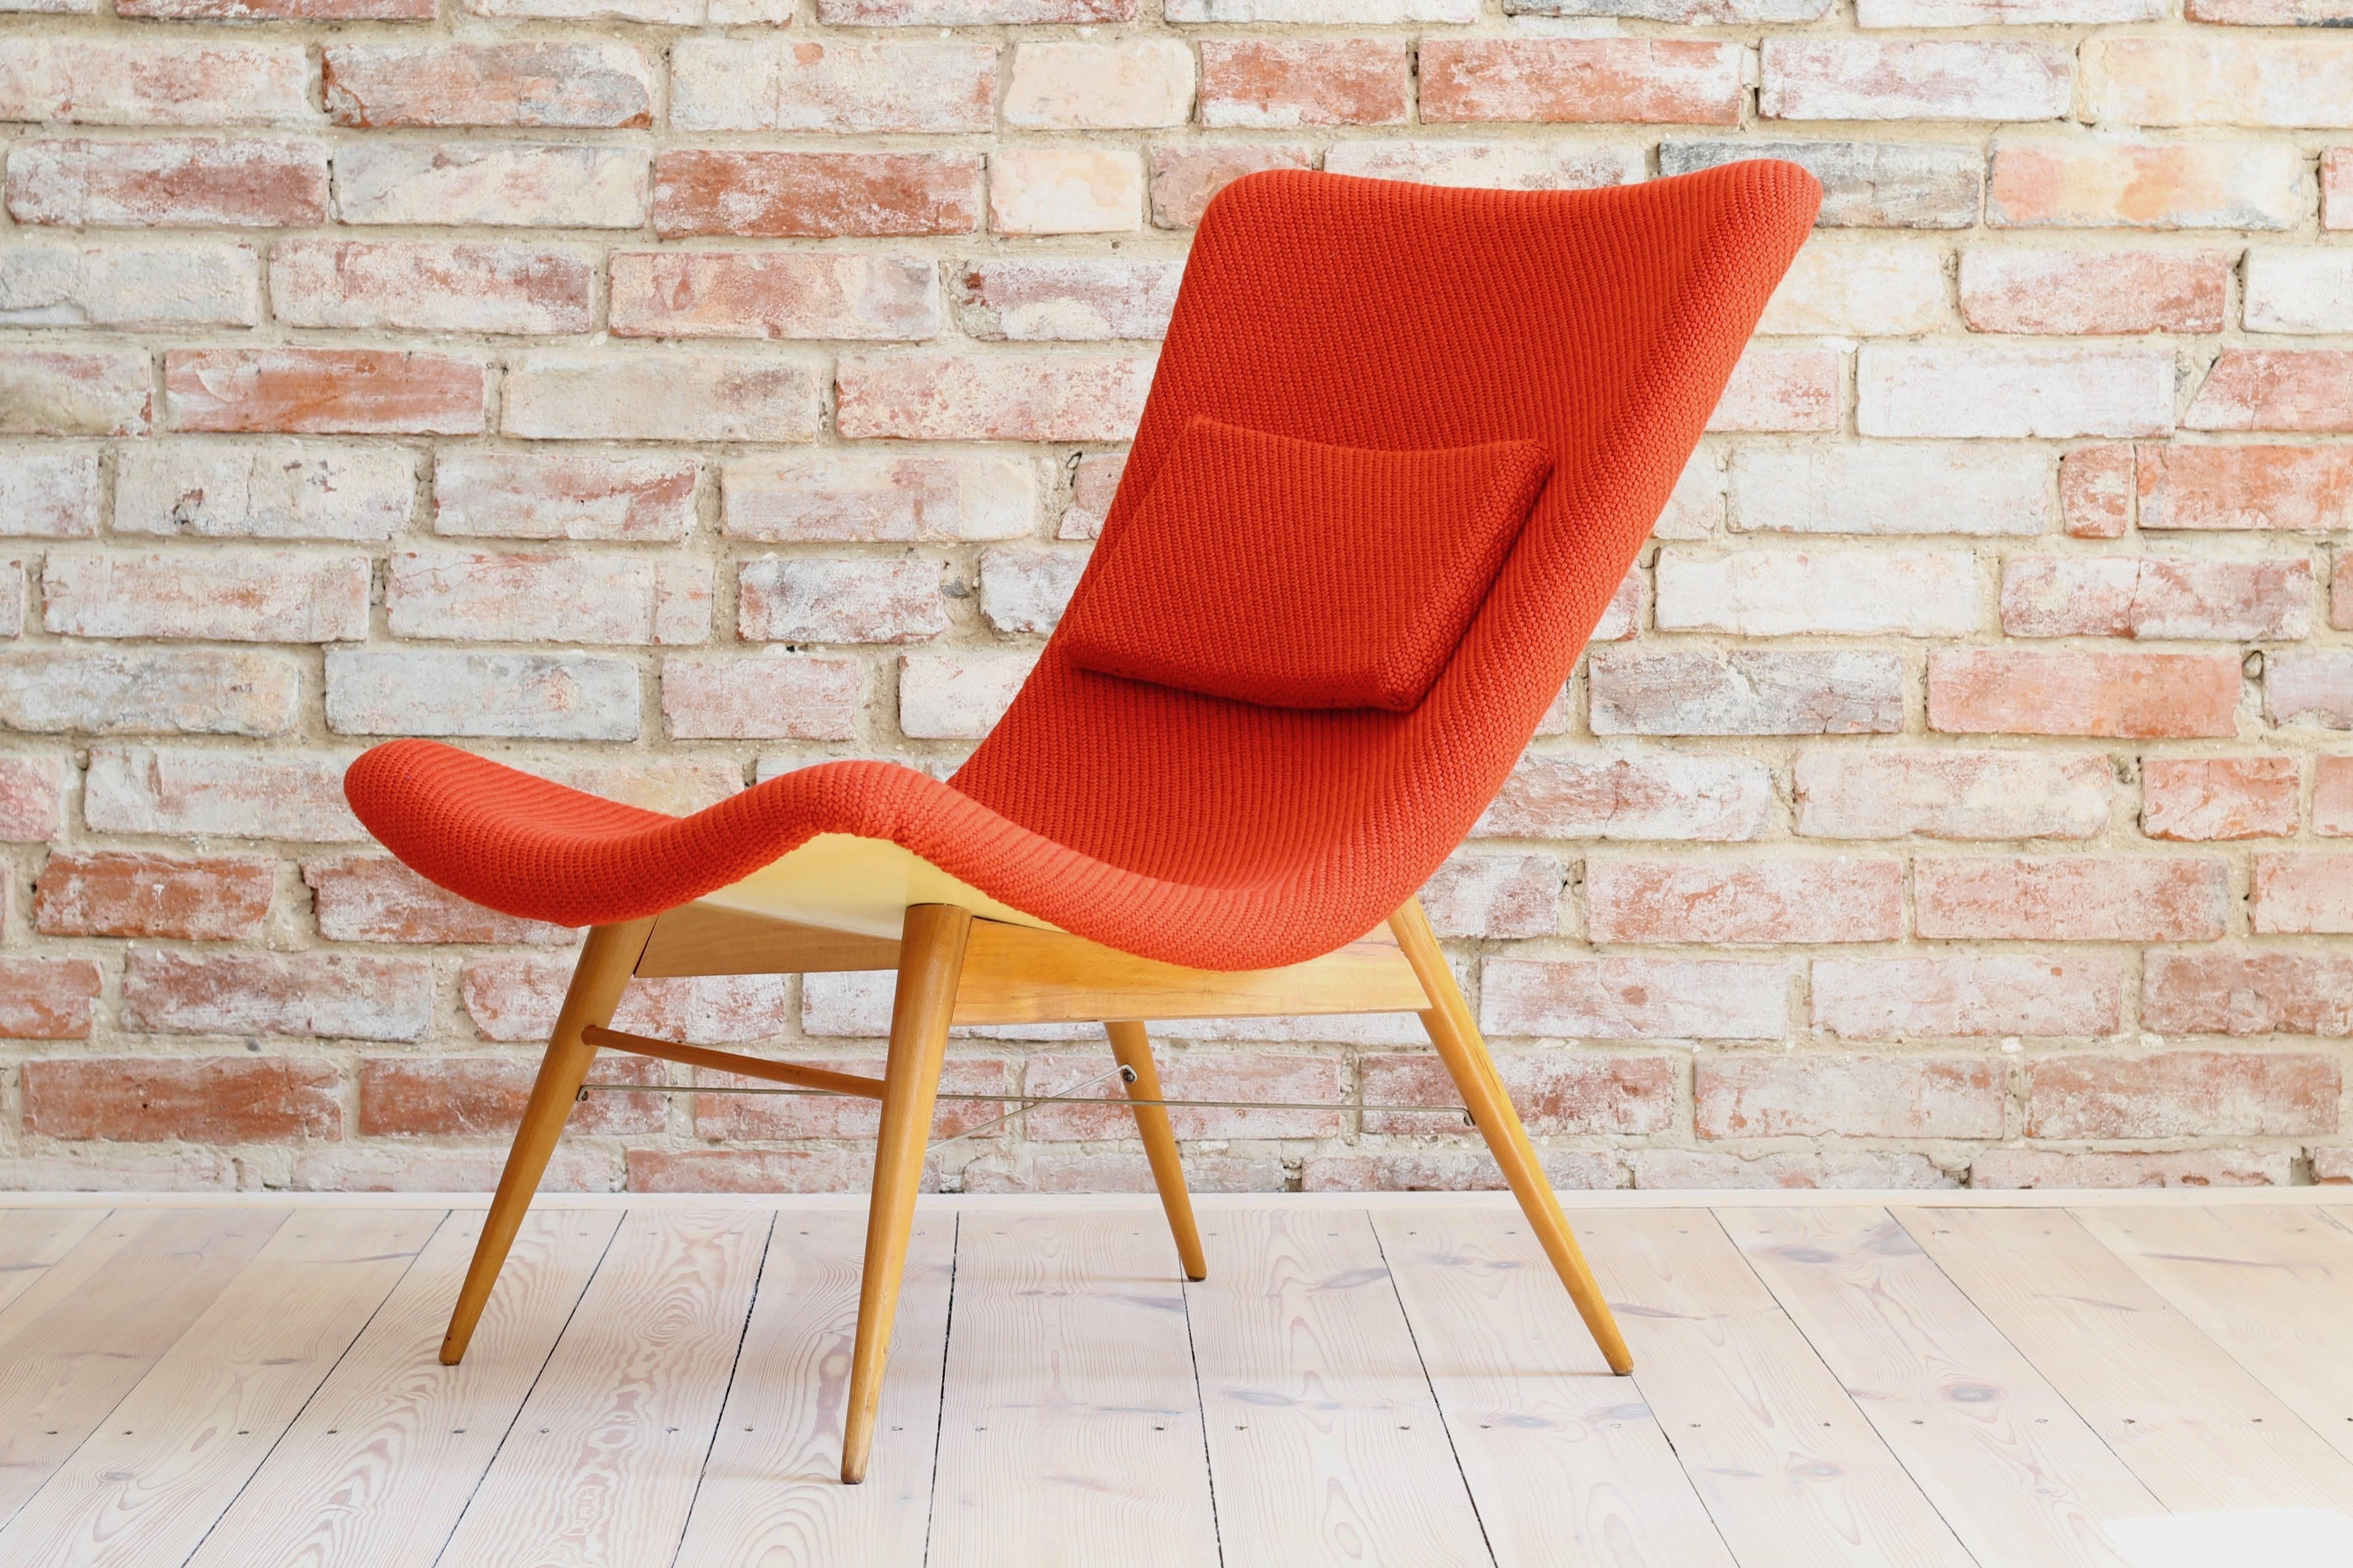 Lounge chair by Miroslav Navratil, manufactured in former Czechoslovakia by Cesky Nabytek, 1959. Original wooden base, fiberglass shell seating. The chair is newly upholstered with a high quality fabric by a Danish brand 